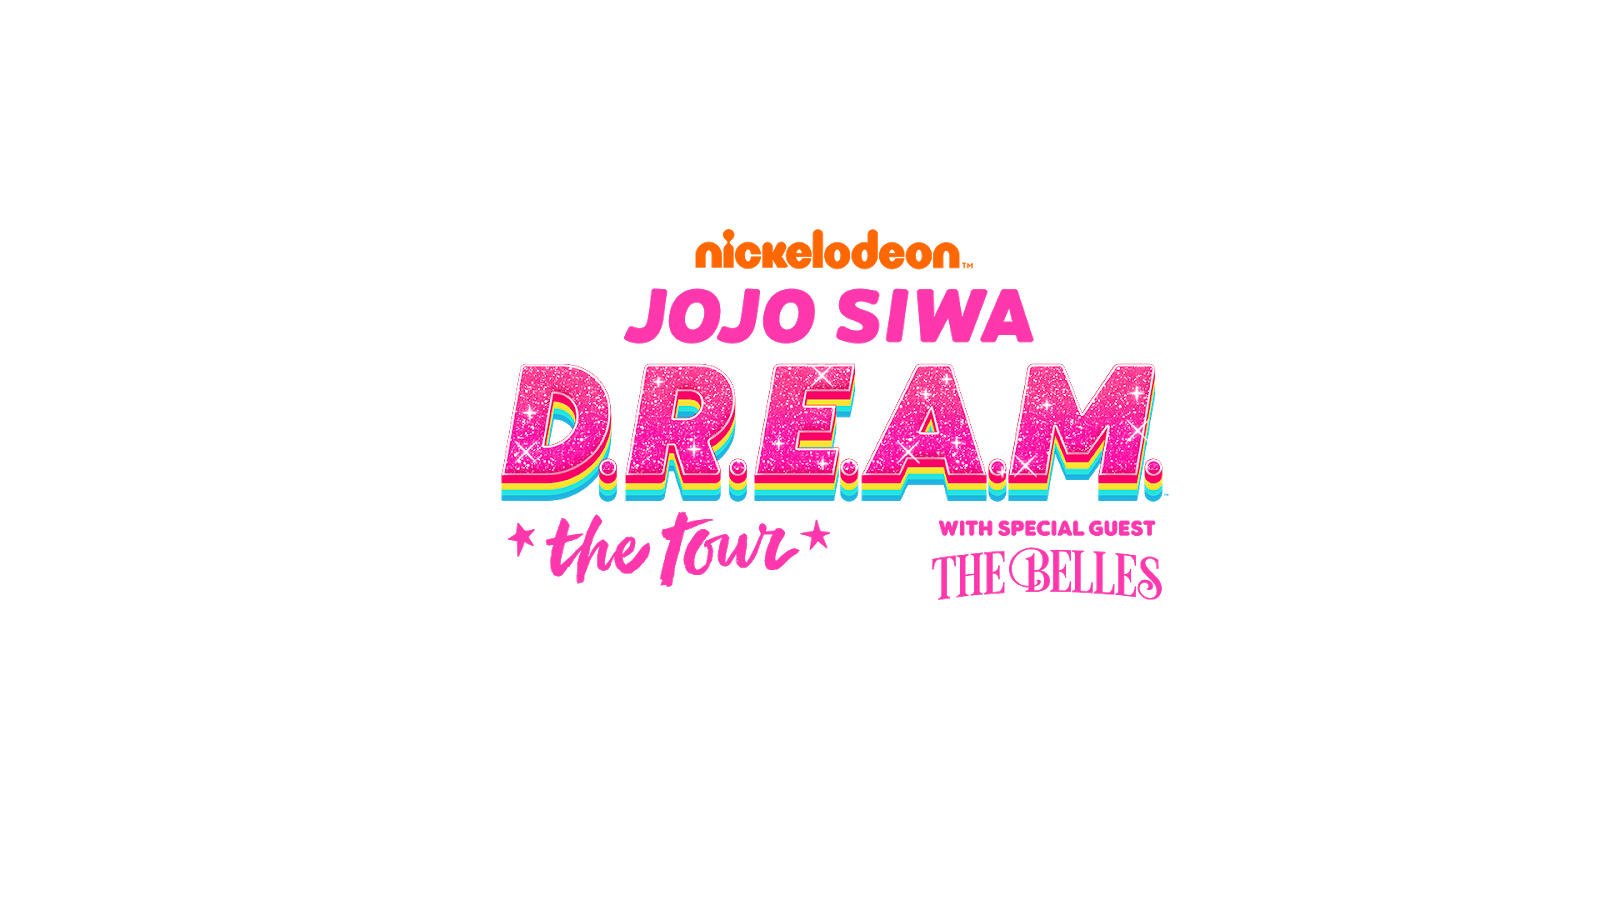 Nickelodeonâ€™s JoJo Siwa D.R.E.A.M. The Tour Adds 50 New Dates in 2020 Updat...